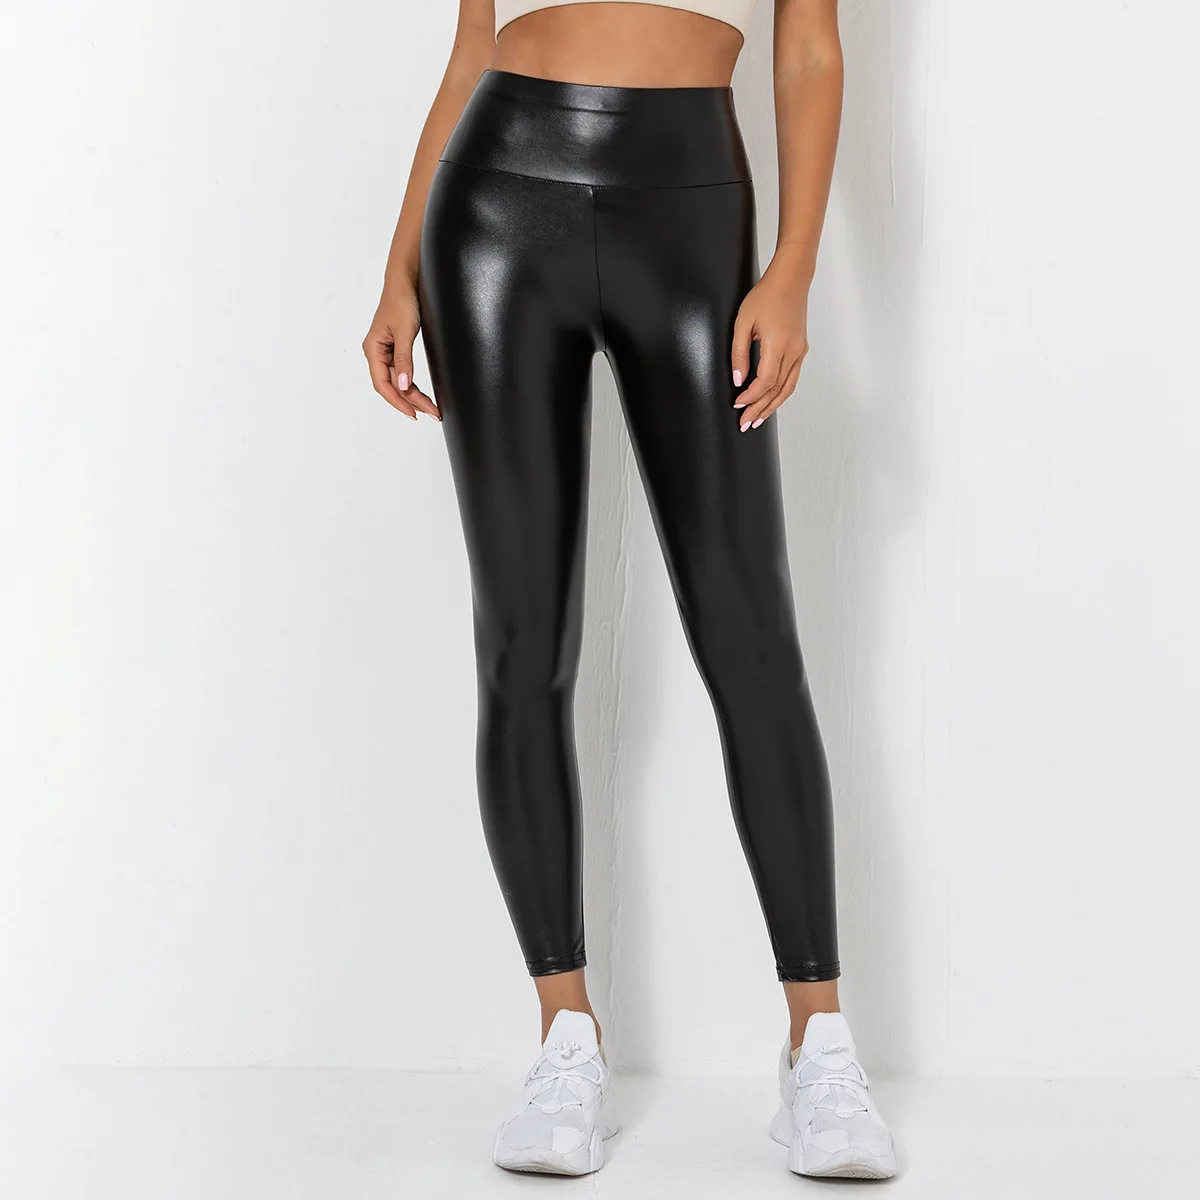 About me - Faux Leather Booty Shaping Leggings